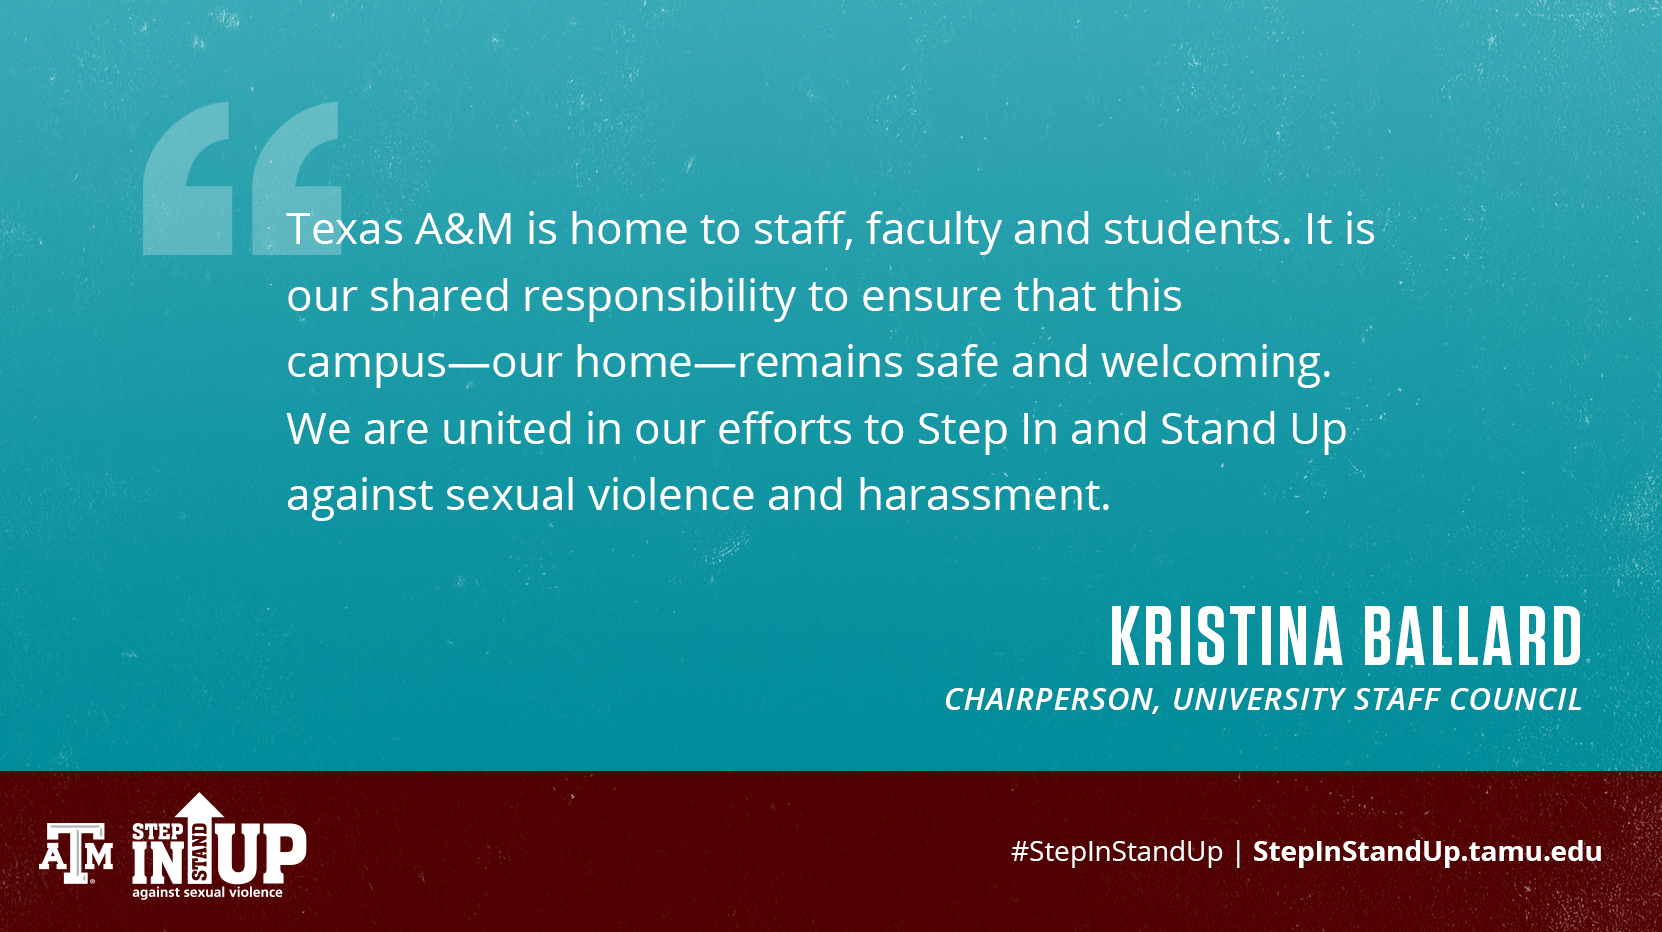 Texas A&M is home to staff, faculty and students. It is our shared responsibility to ensure that this campus--our home--remains safe and welcoming. We are united in our efforts to Step In and Stand Up against sexual violence and harassment. Kristina Ballard, Chairperson, University Staff Council